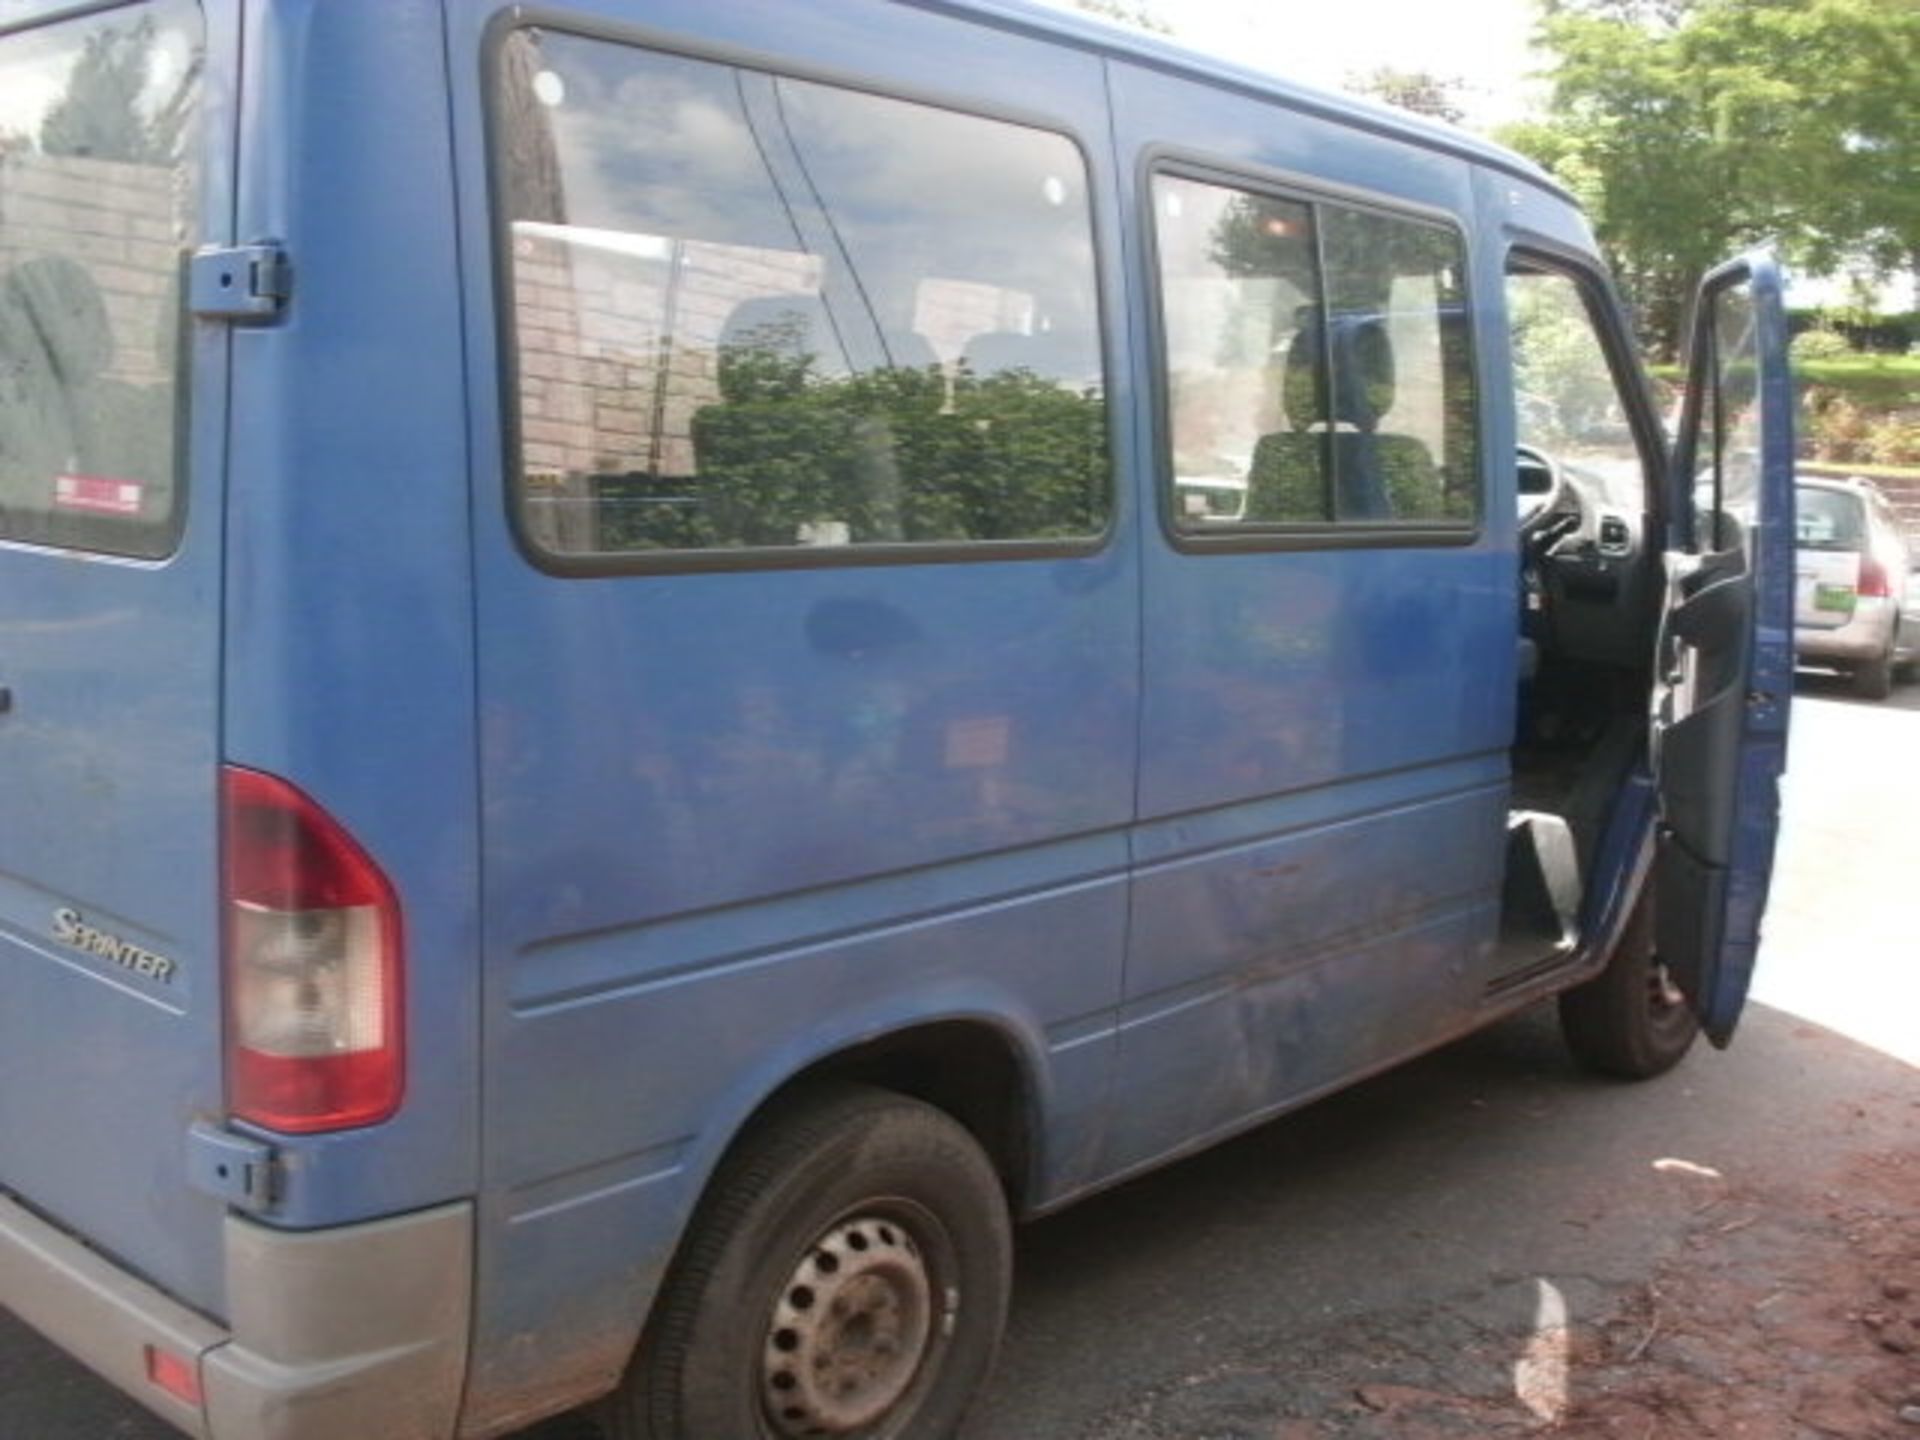 2005 (March) MERCEDES SPRINTER 211 Cdi SWB 9 seater MINI BUS including driver, blue, diesel, 2148cc, - Image 3 of 4